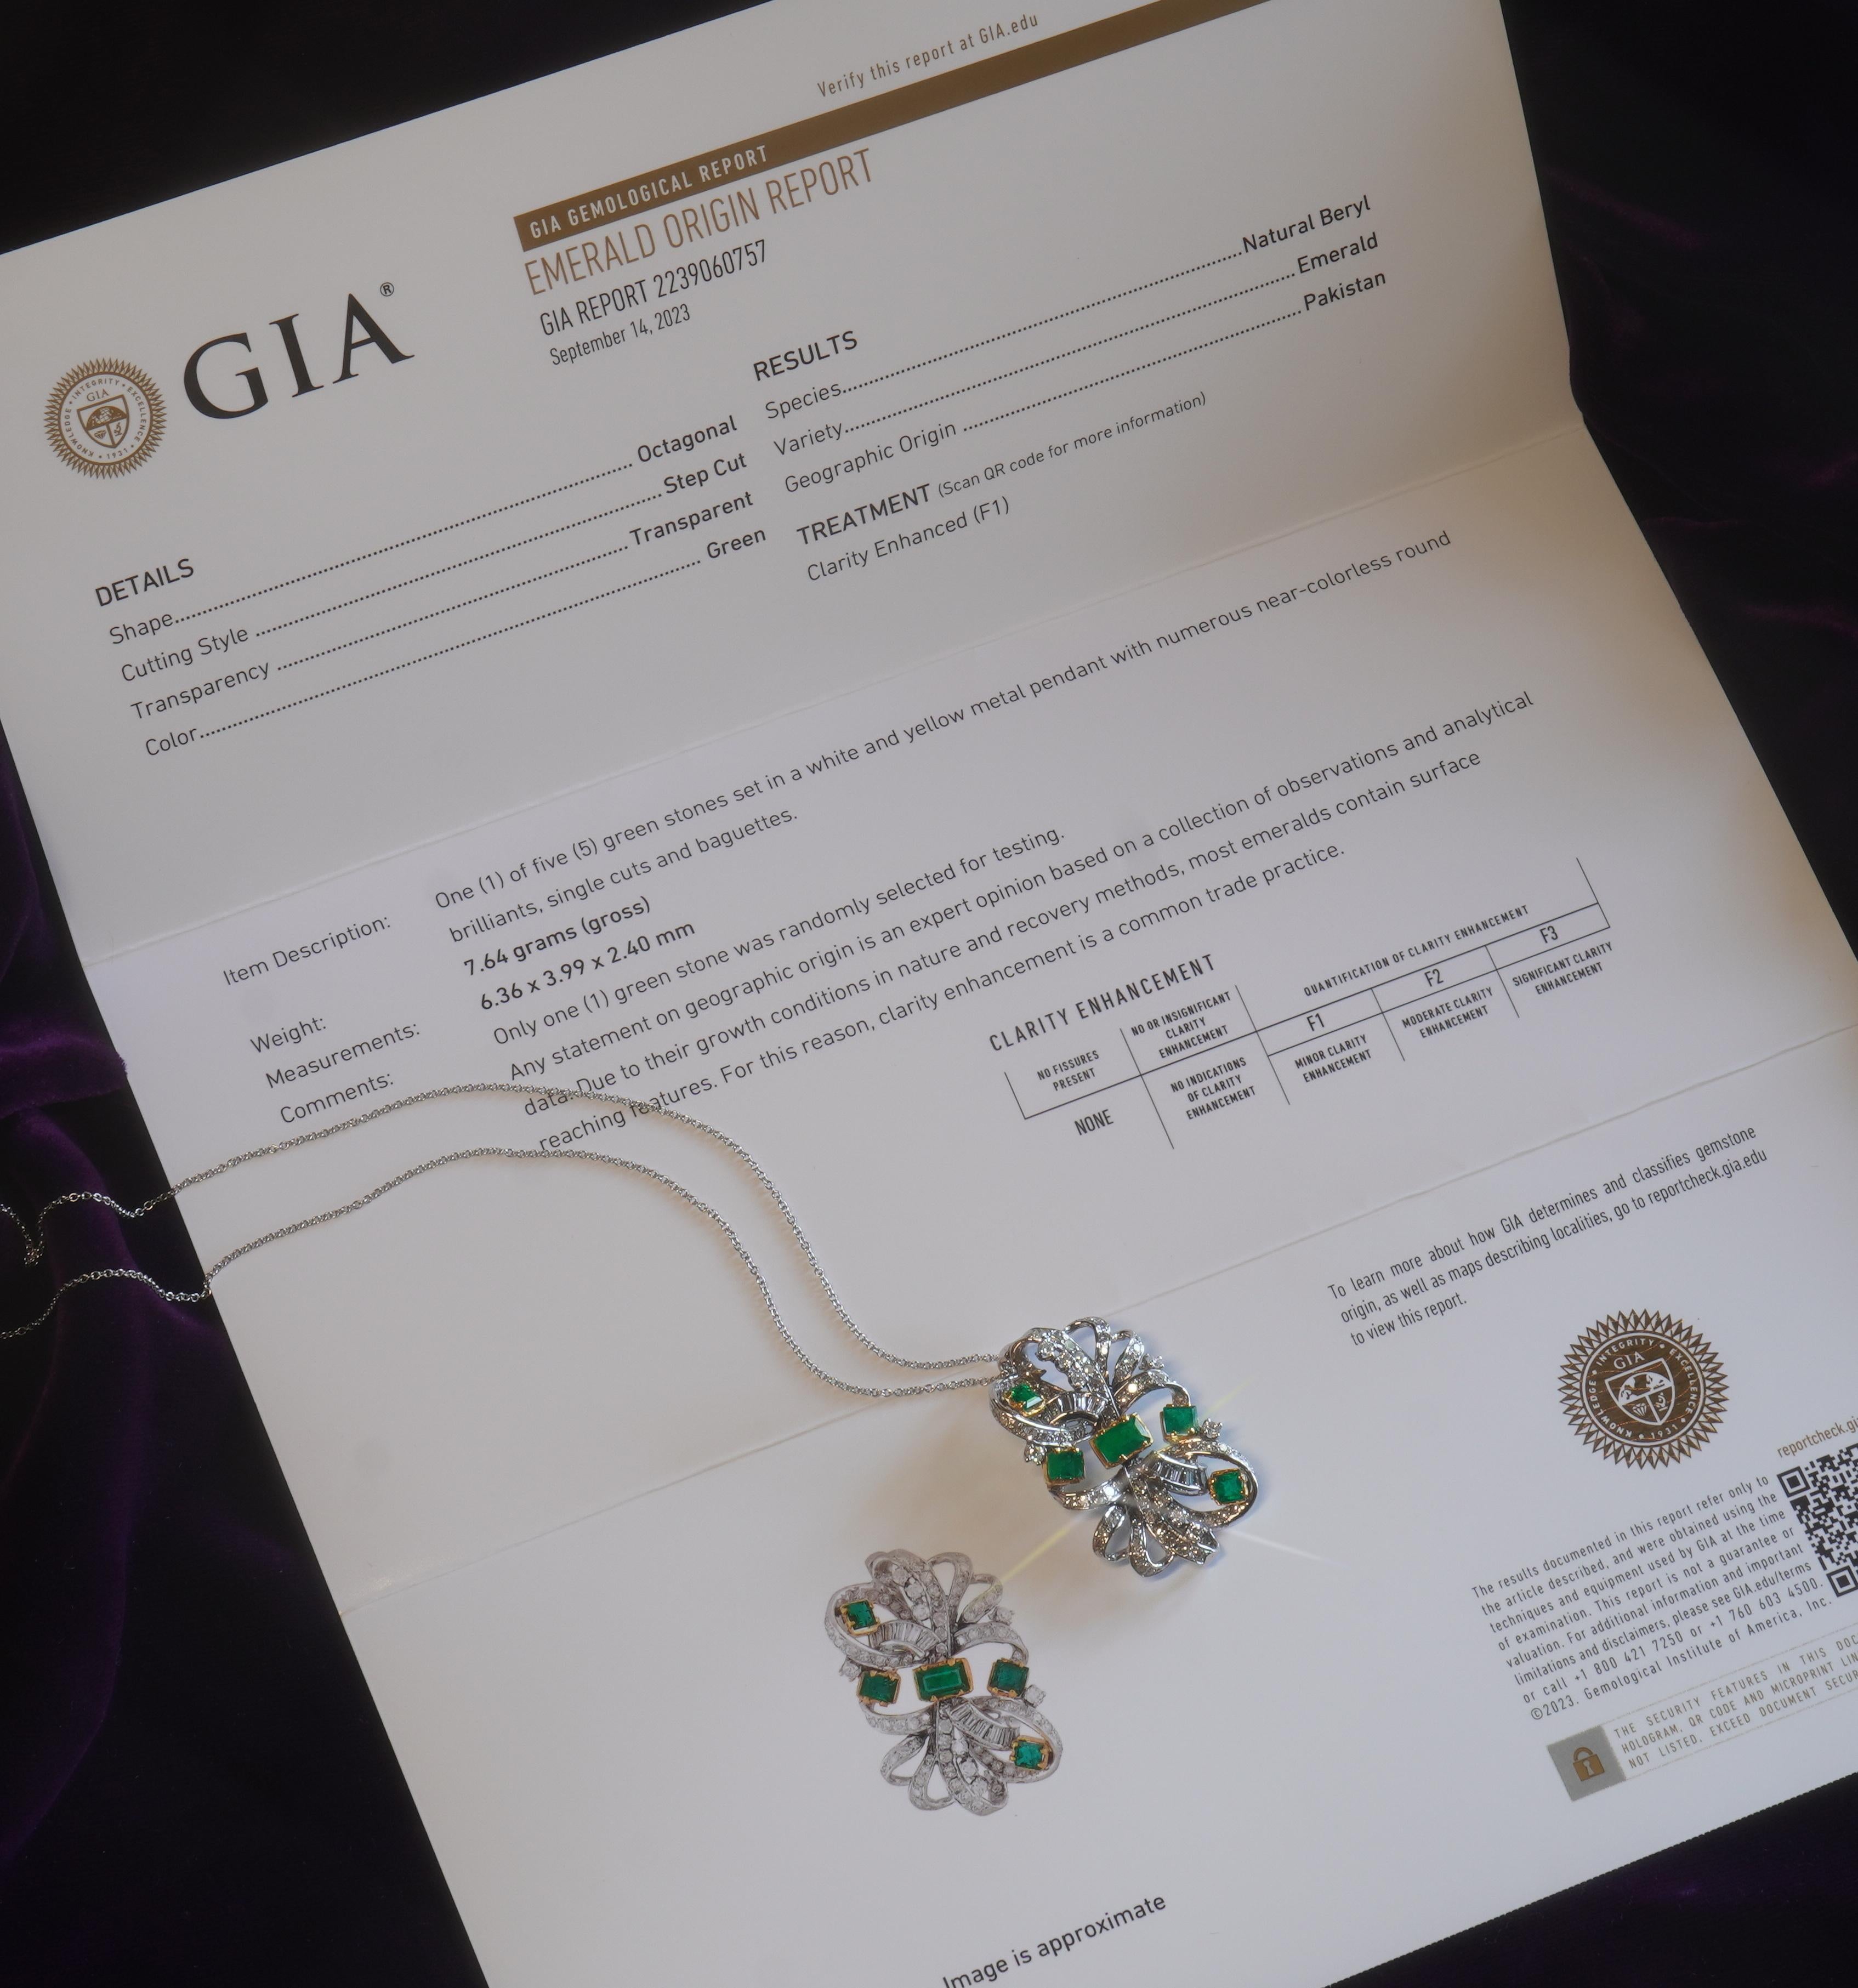 Old South Jewels proudly presents VINTAGE LUXURY.  HUGE GIA CERTIFIED 5.26 CARAT GREEN EMERALD AND DIAMOND PLATINUM NECKLACE & BOX!  RARE LUXURIOUS ANTIQUE PLATINUM & 18K COVERED IN FINEST VIBRANT EMERALDS AND DIAMONDS.   2.18 CARATS RICH GREEN